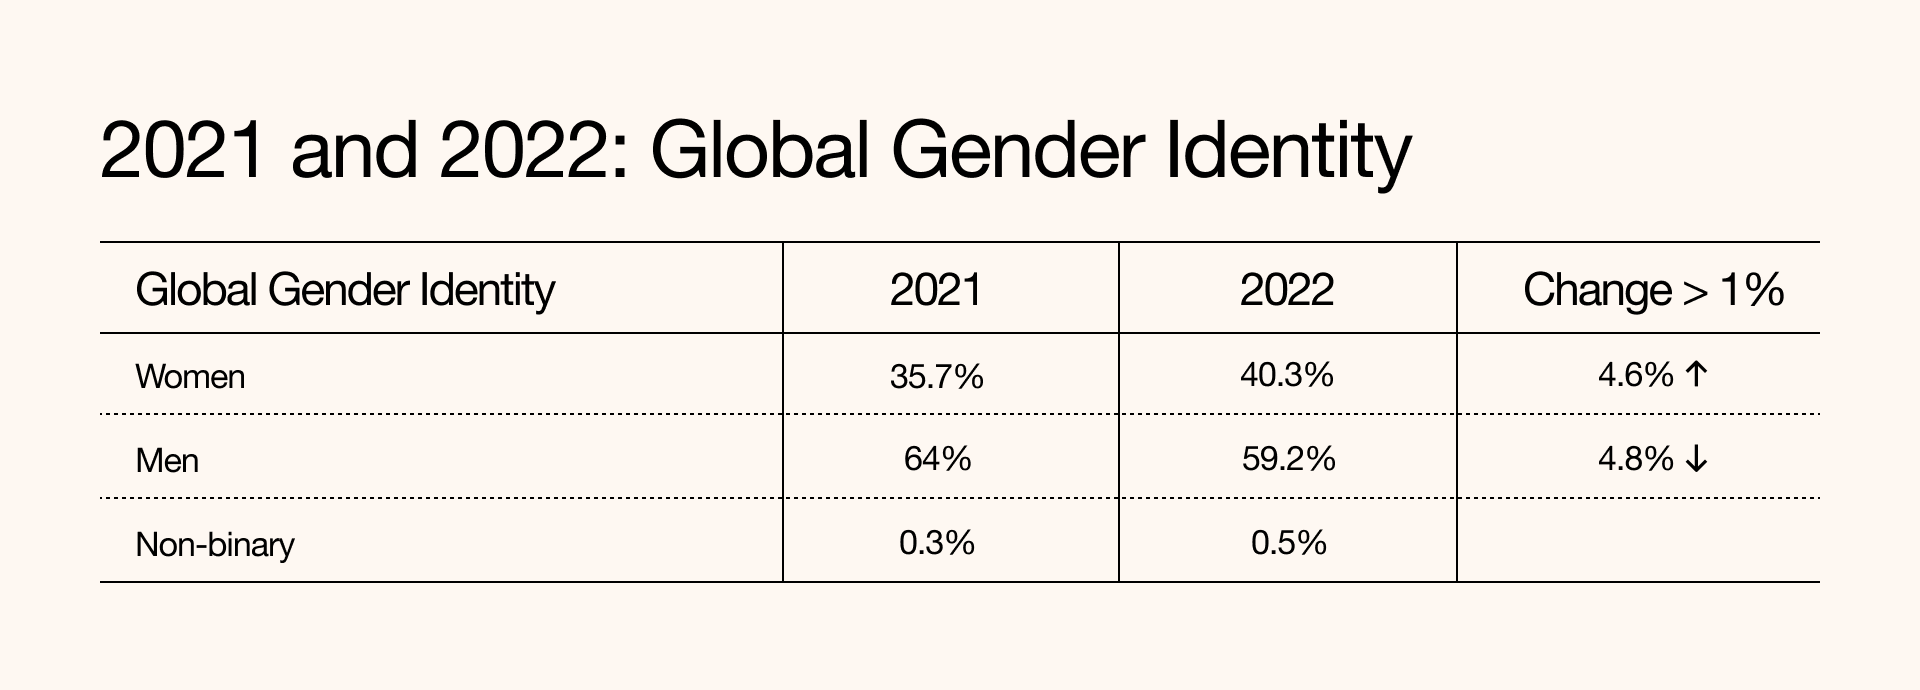 Table showing percent change in gender identity at Vimeo between 2021 and 2022